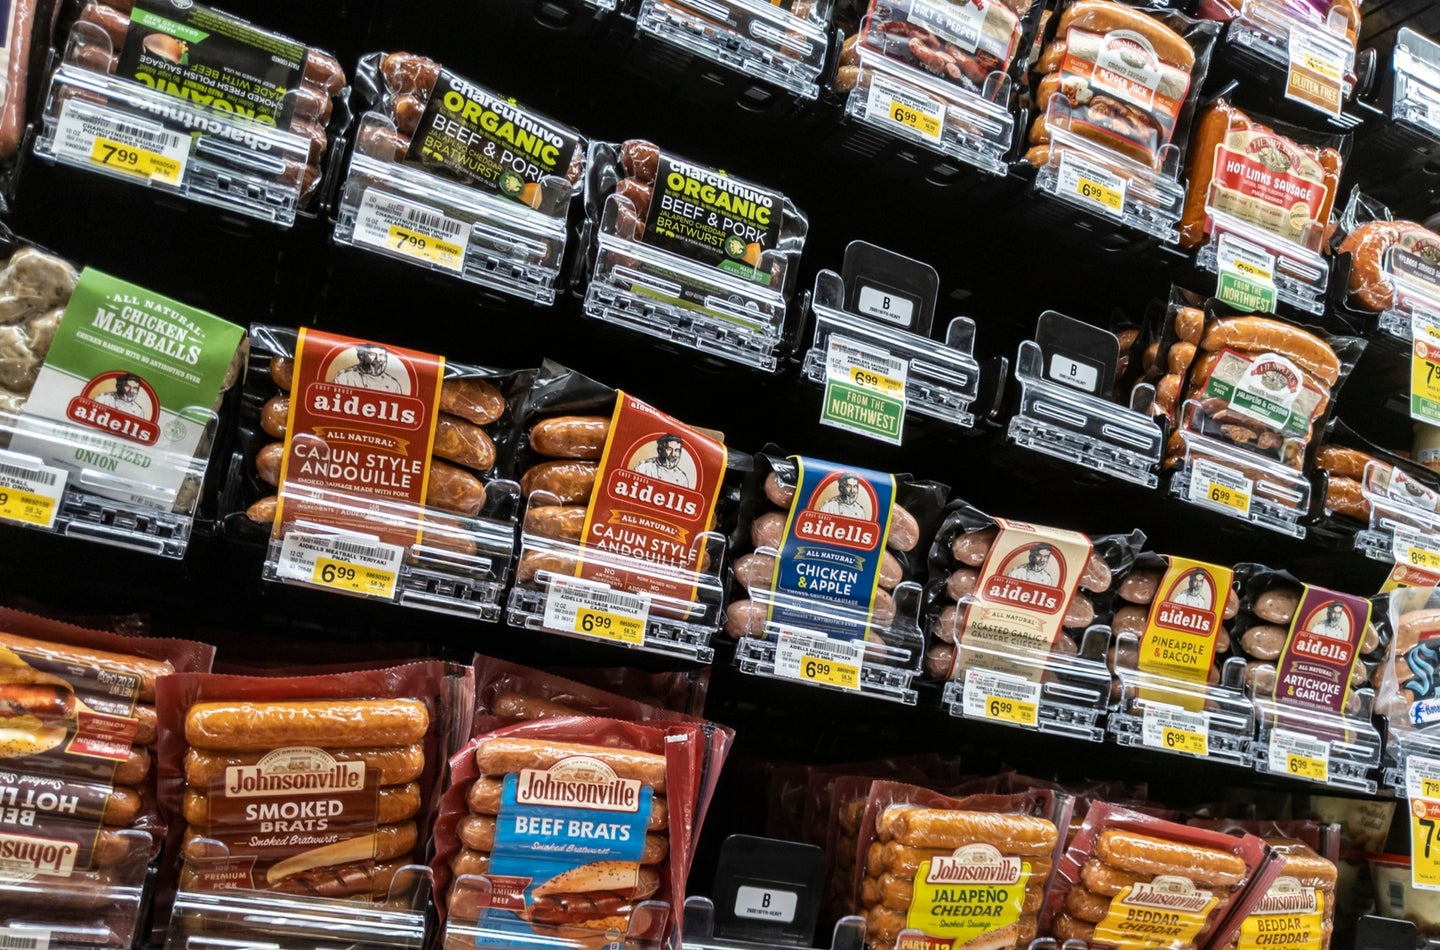 Hot dogs at the grocery store without meat warning labels